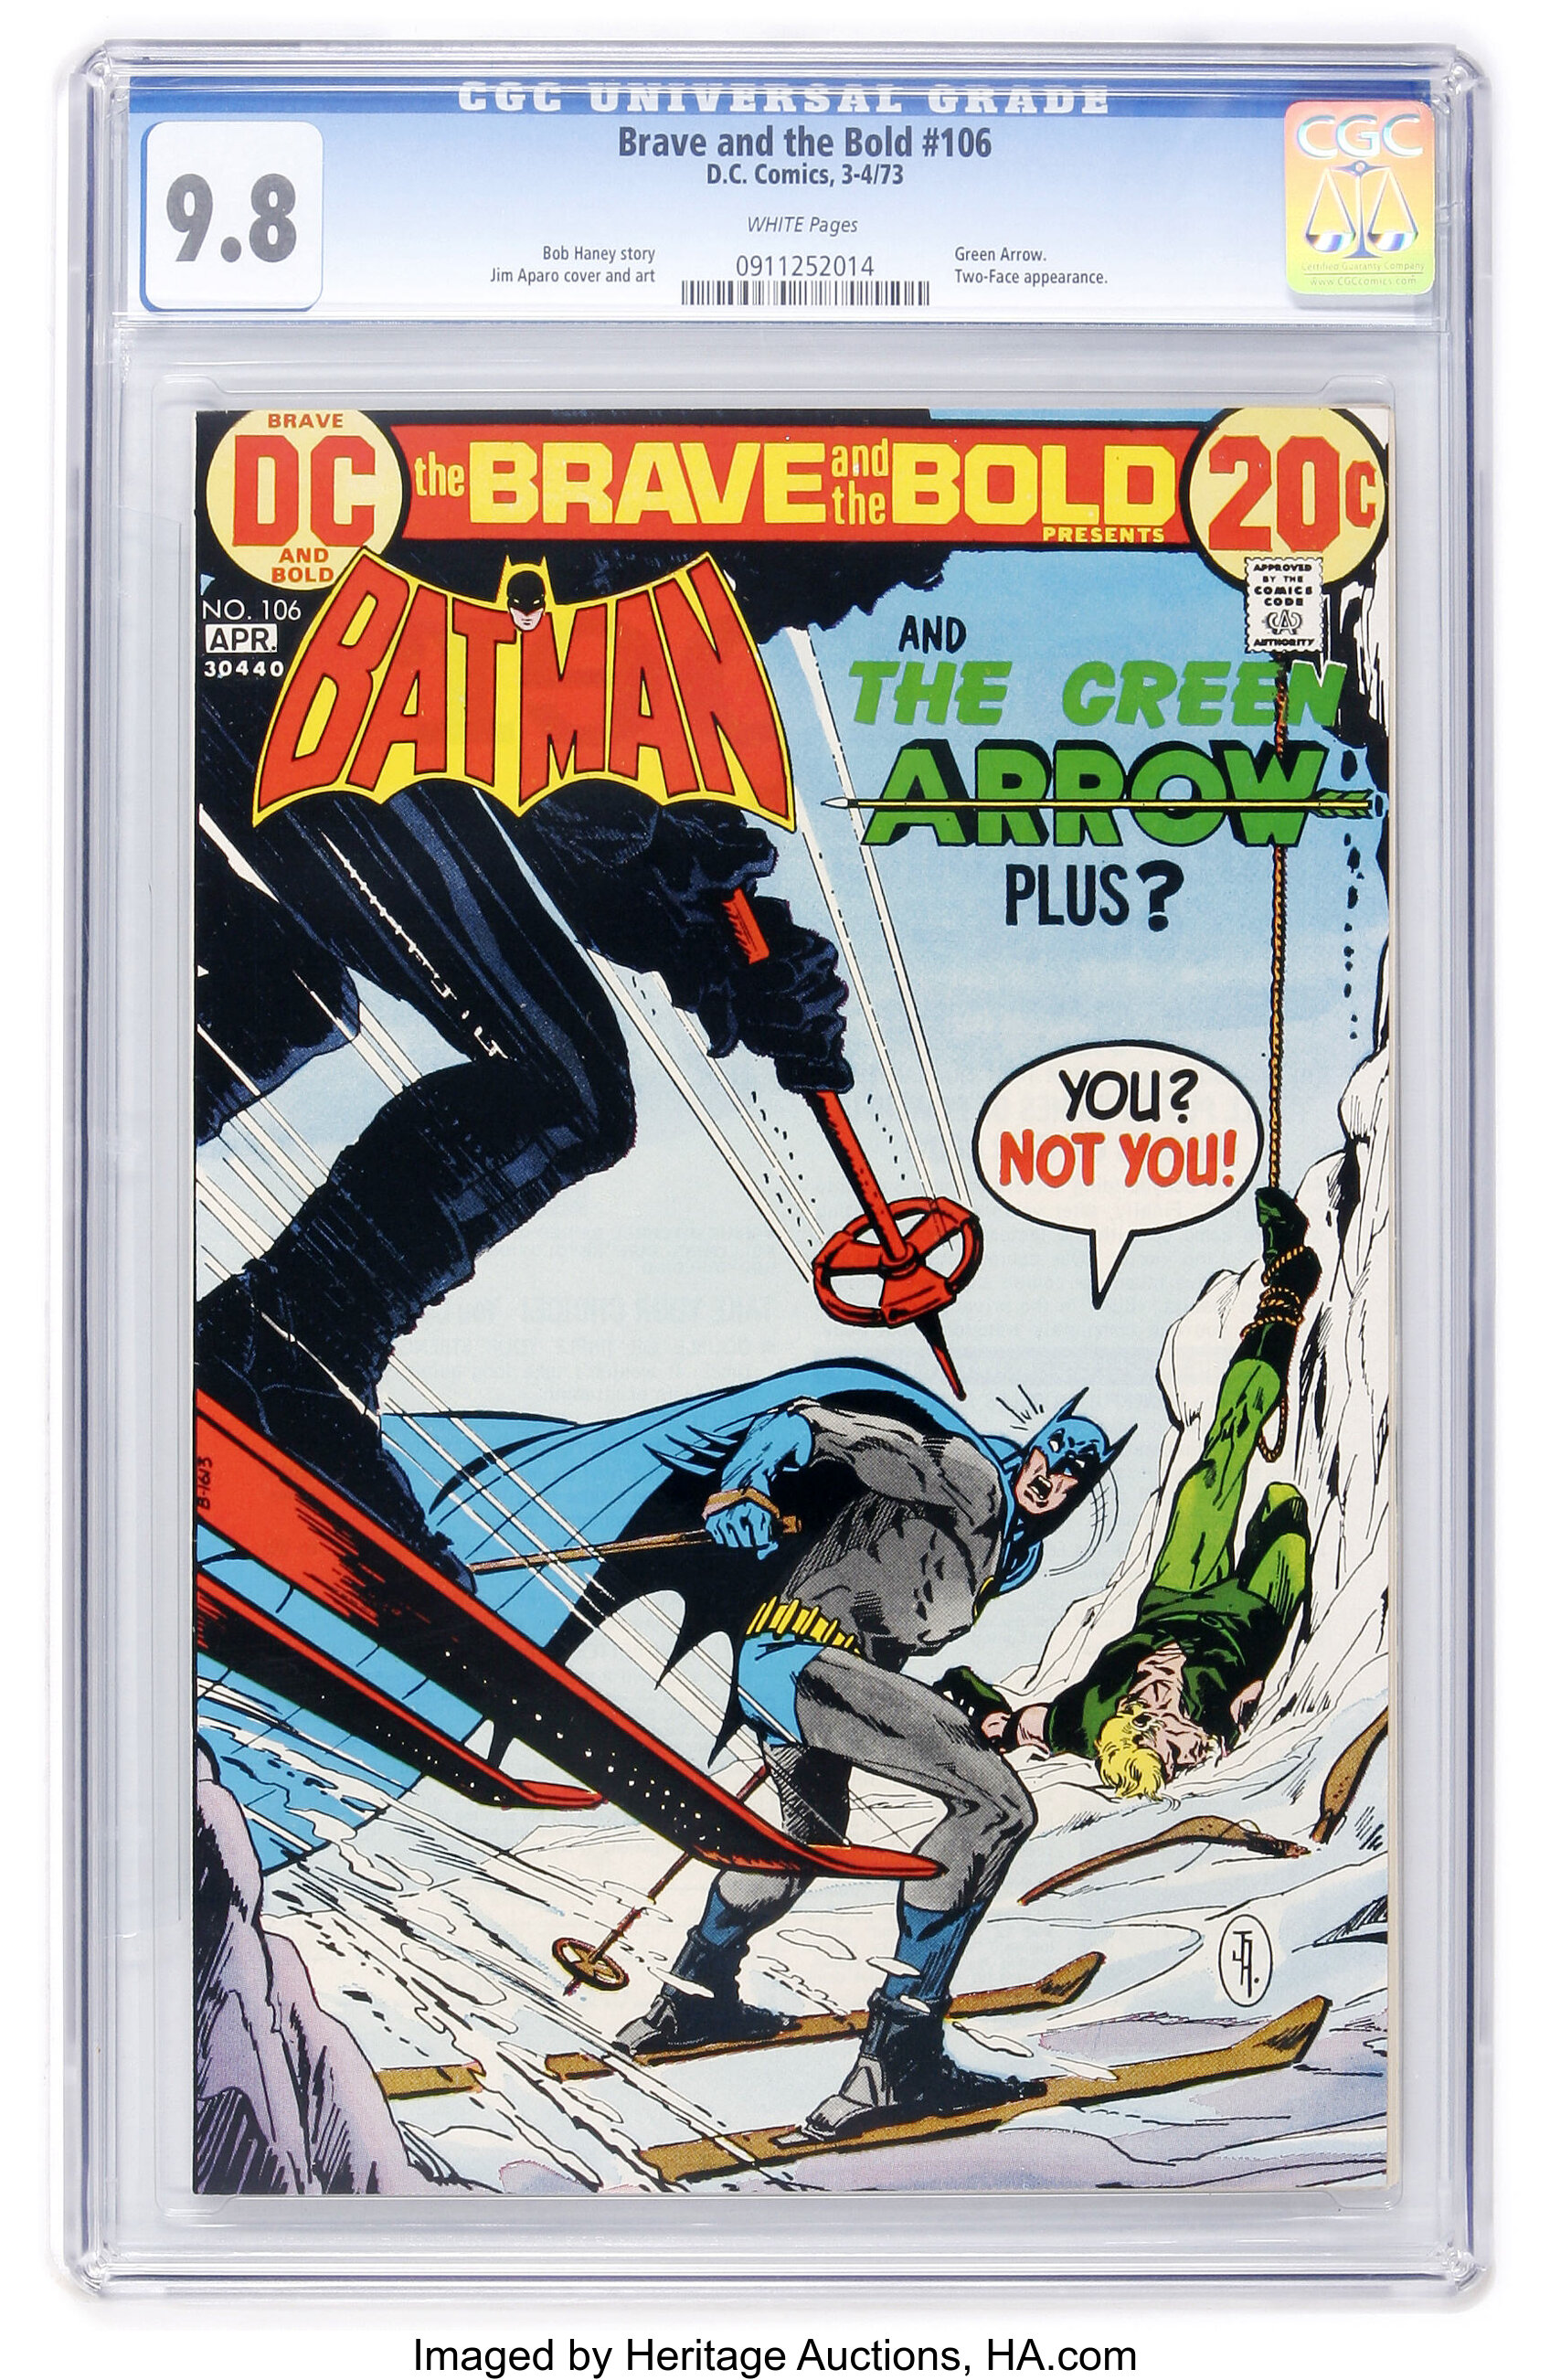 How Much Is The Brave and the Bold #106 Worth? Browse Comic Prices